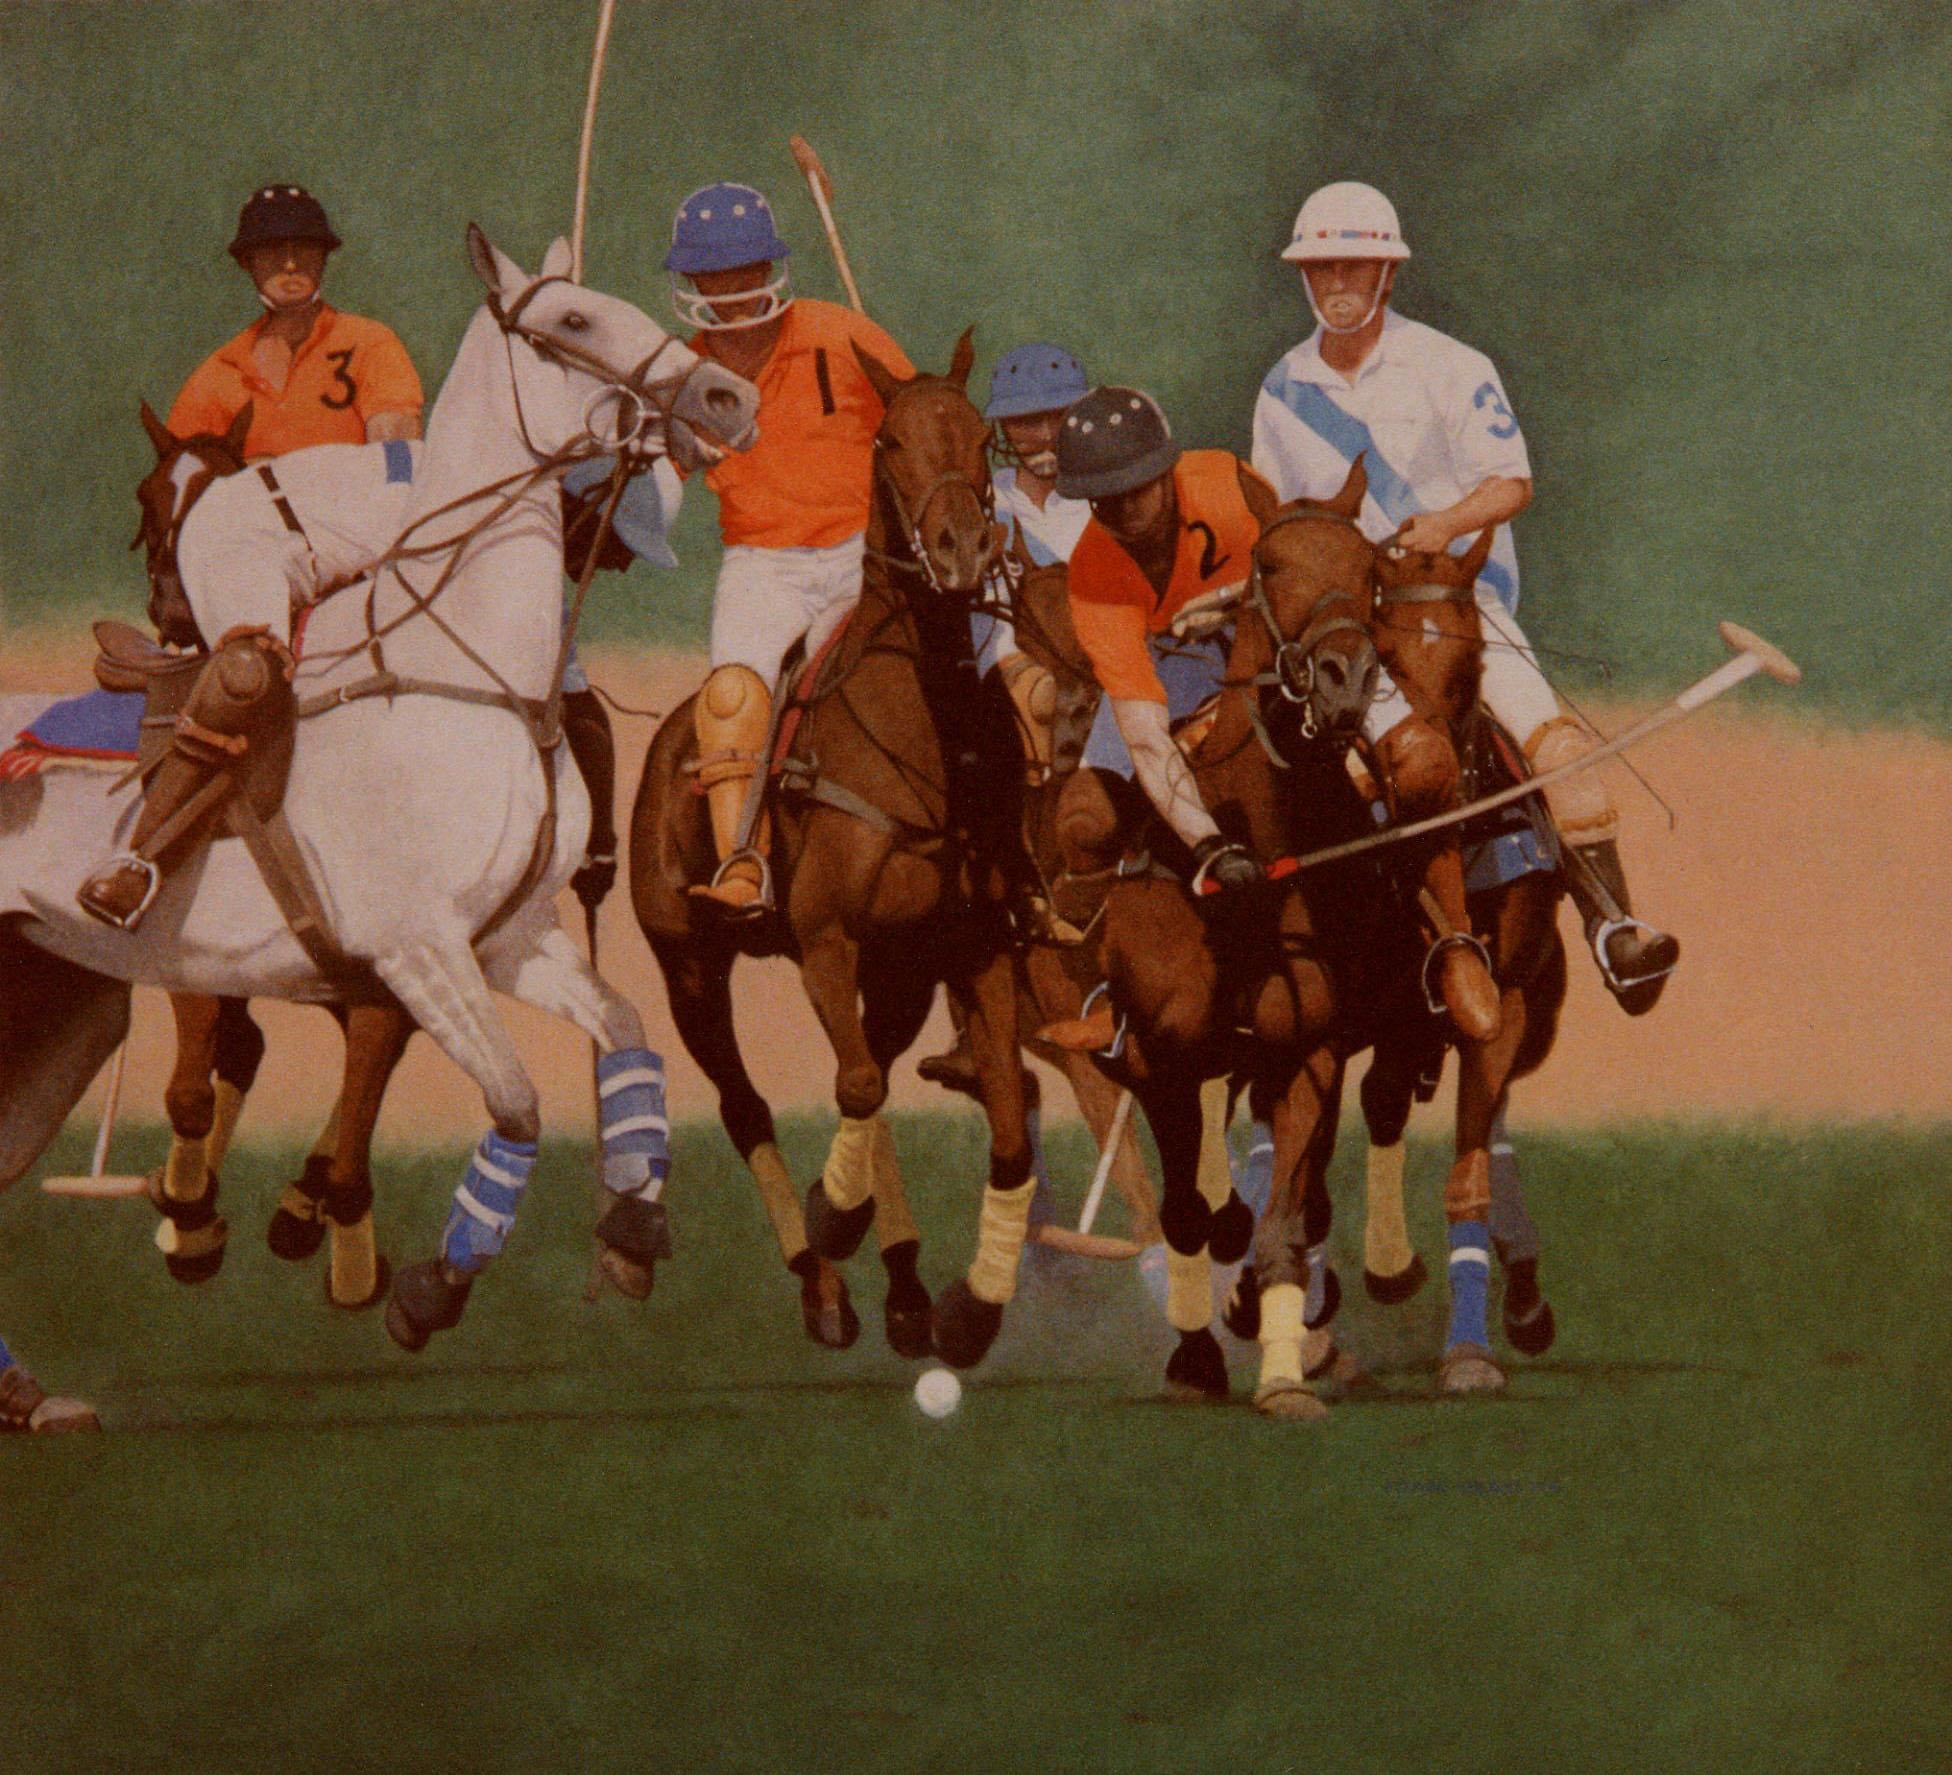 Steve Greaves - The Polo Match - photorealism sport painting